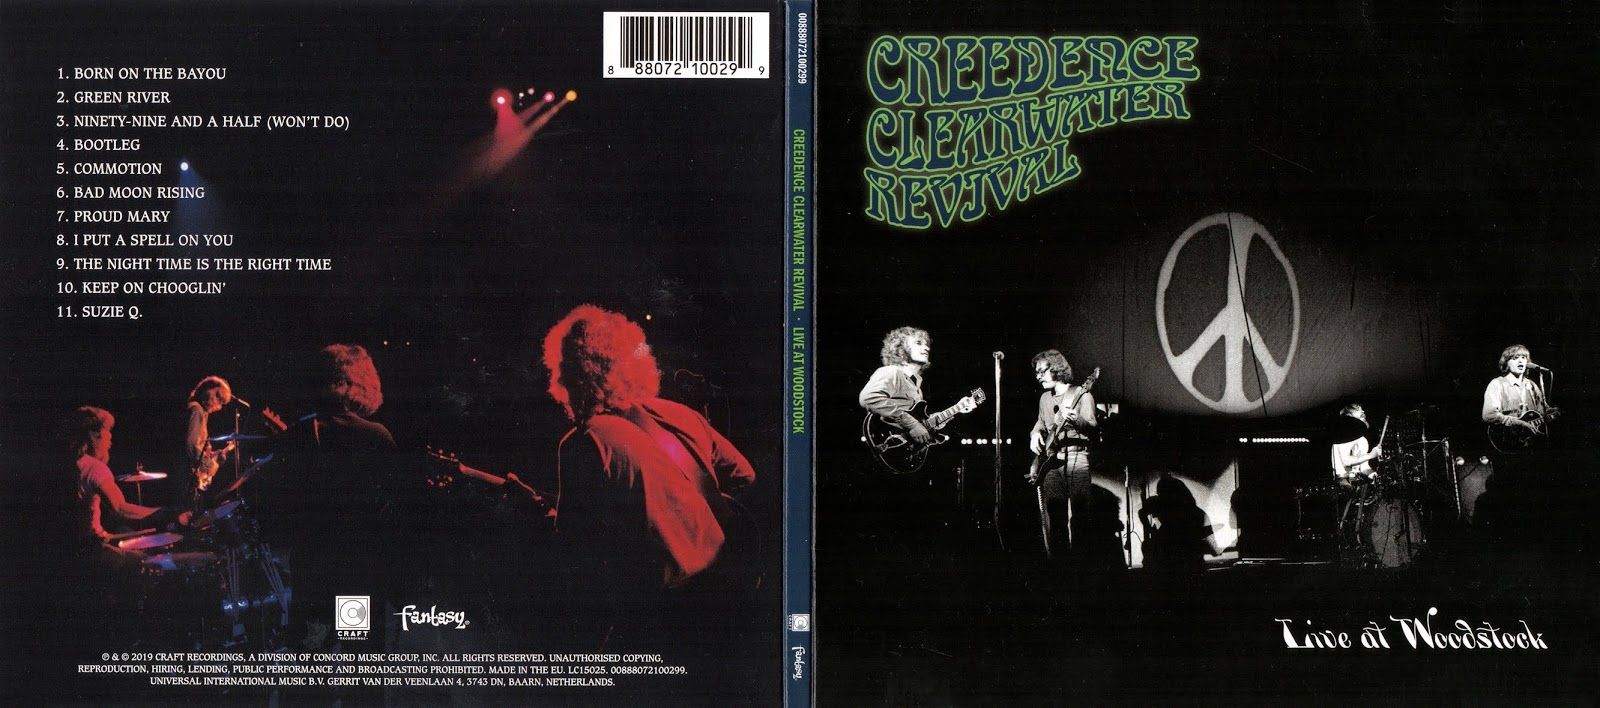 2019 Live At Woodstock - Creedence Clearwater Revival - Rockronología